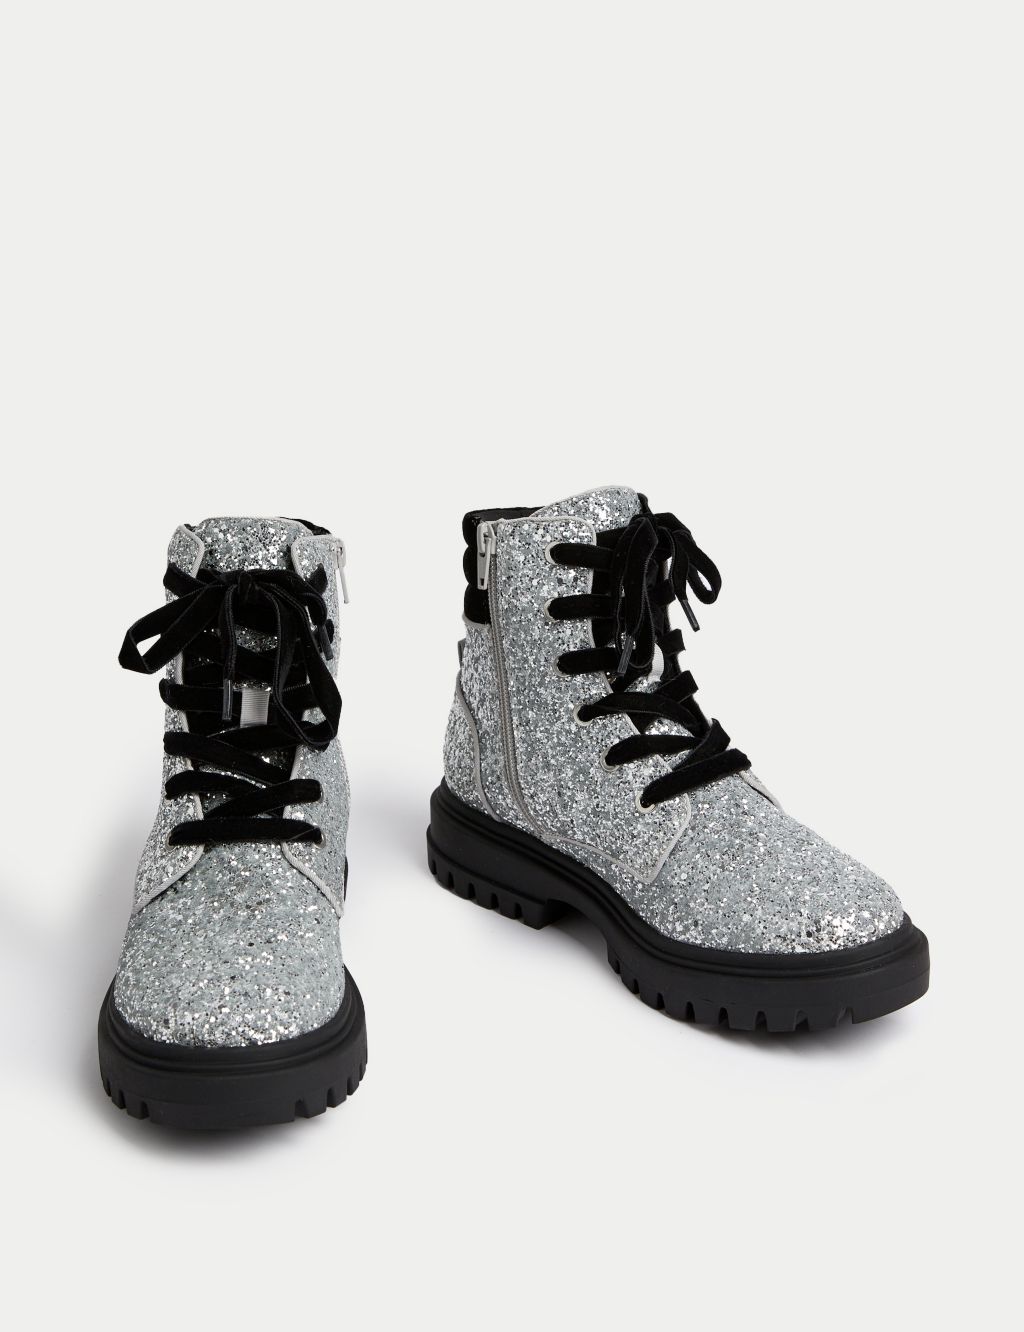 Kids' Glitter Snow Boots (13 Small - 6 Large) image 2